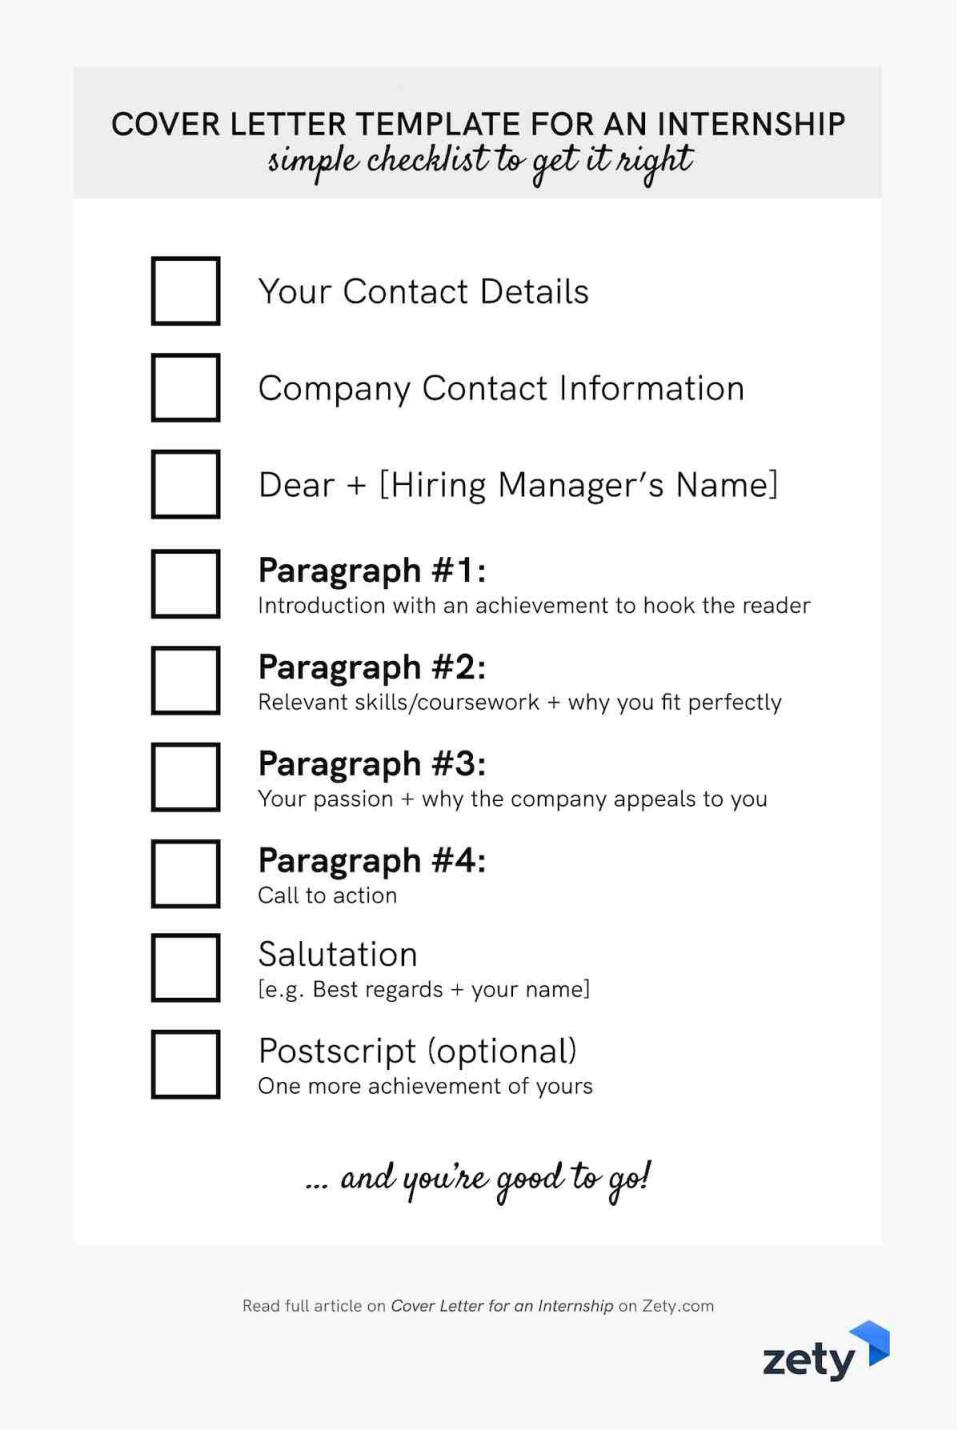 Cover letter template for an internship - checklist